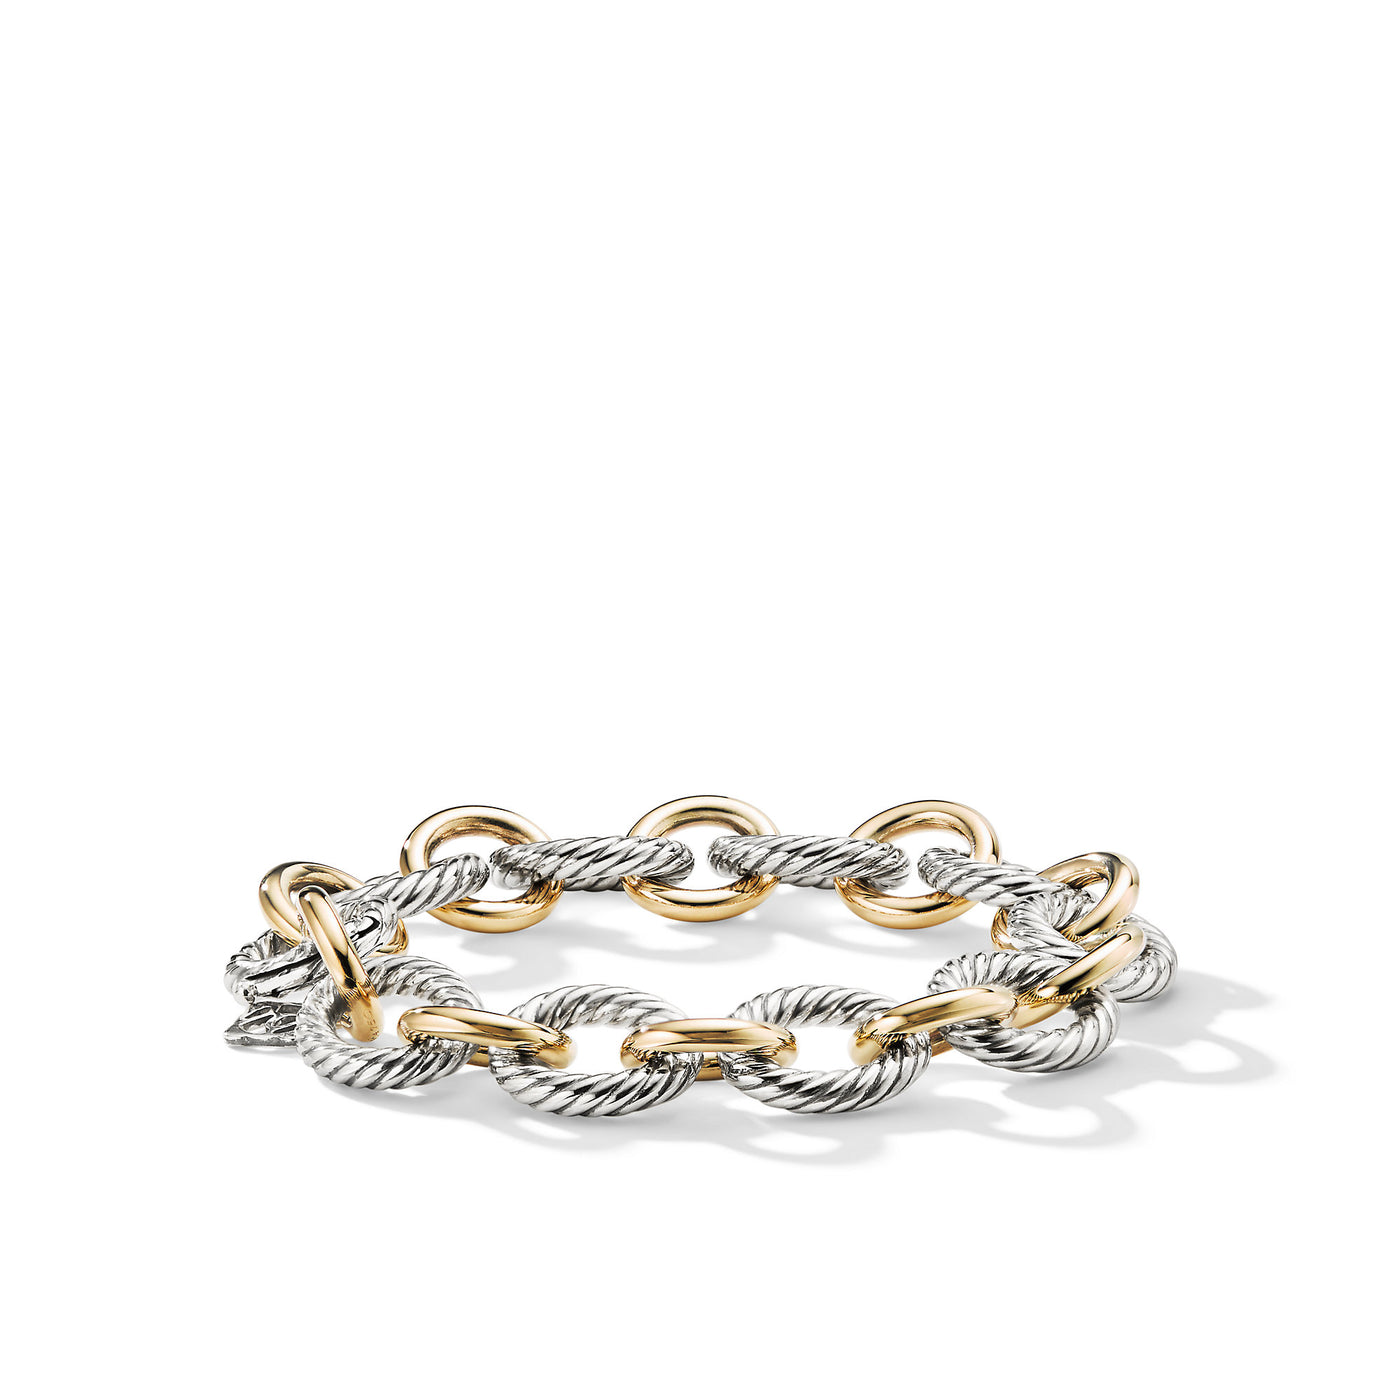 Oval Link Chain Bracelet in Sterling Silver with 18K Yellow Gold\, 12mm